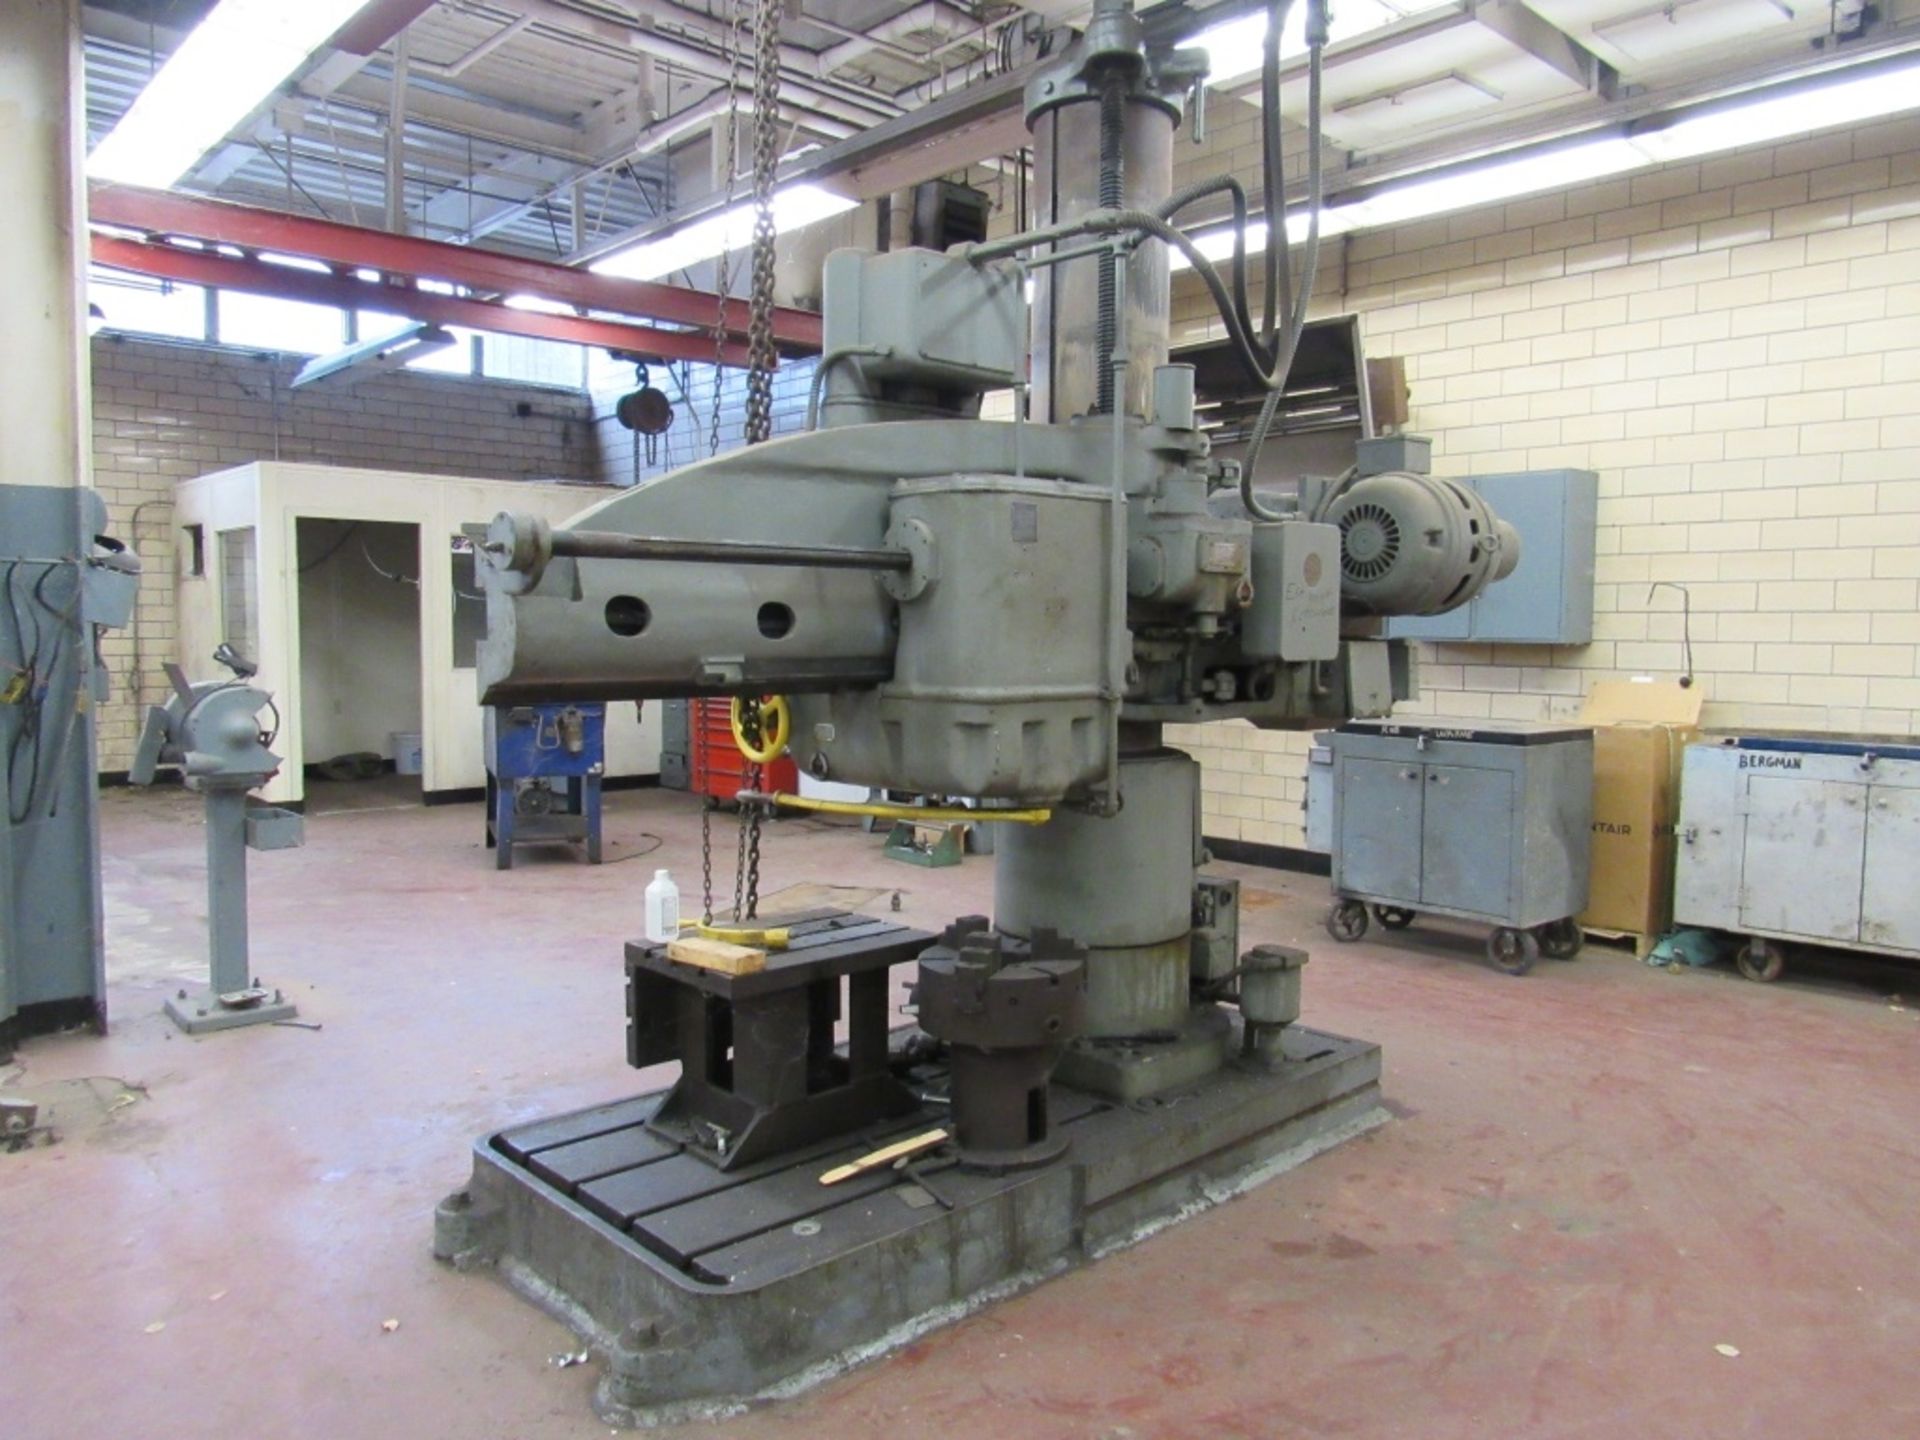 Carlton Radial Arm Drill- Model - Unmarked Serial - Unmarked Rigging Fee - $750.00 4' Arm 15" Col - Image 2 of 25